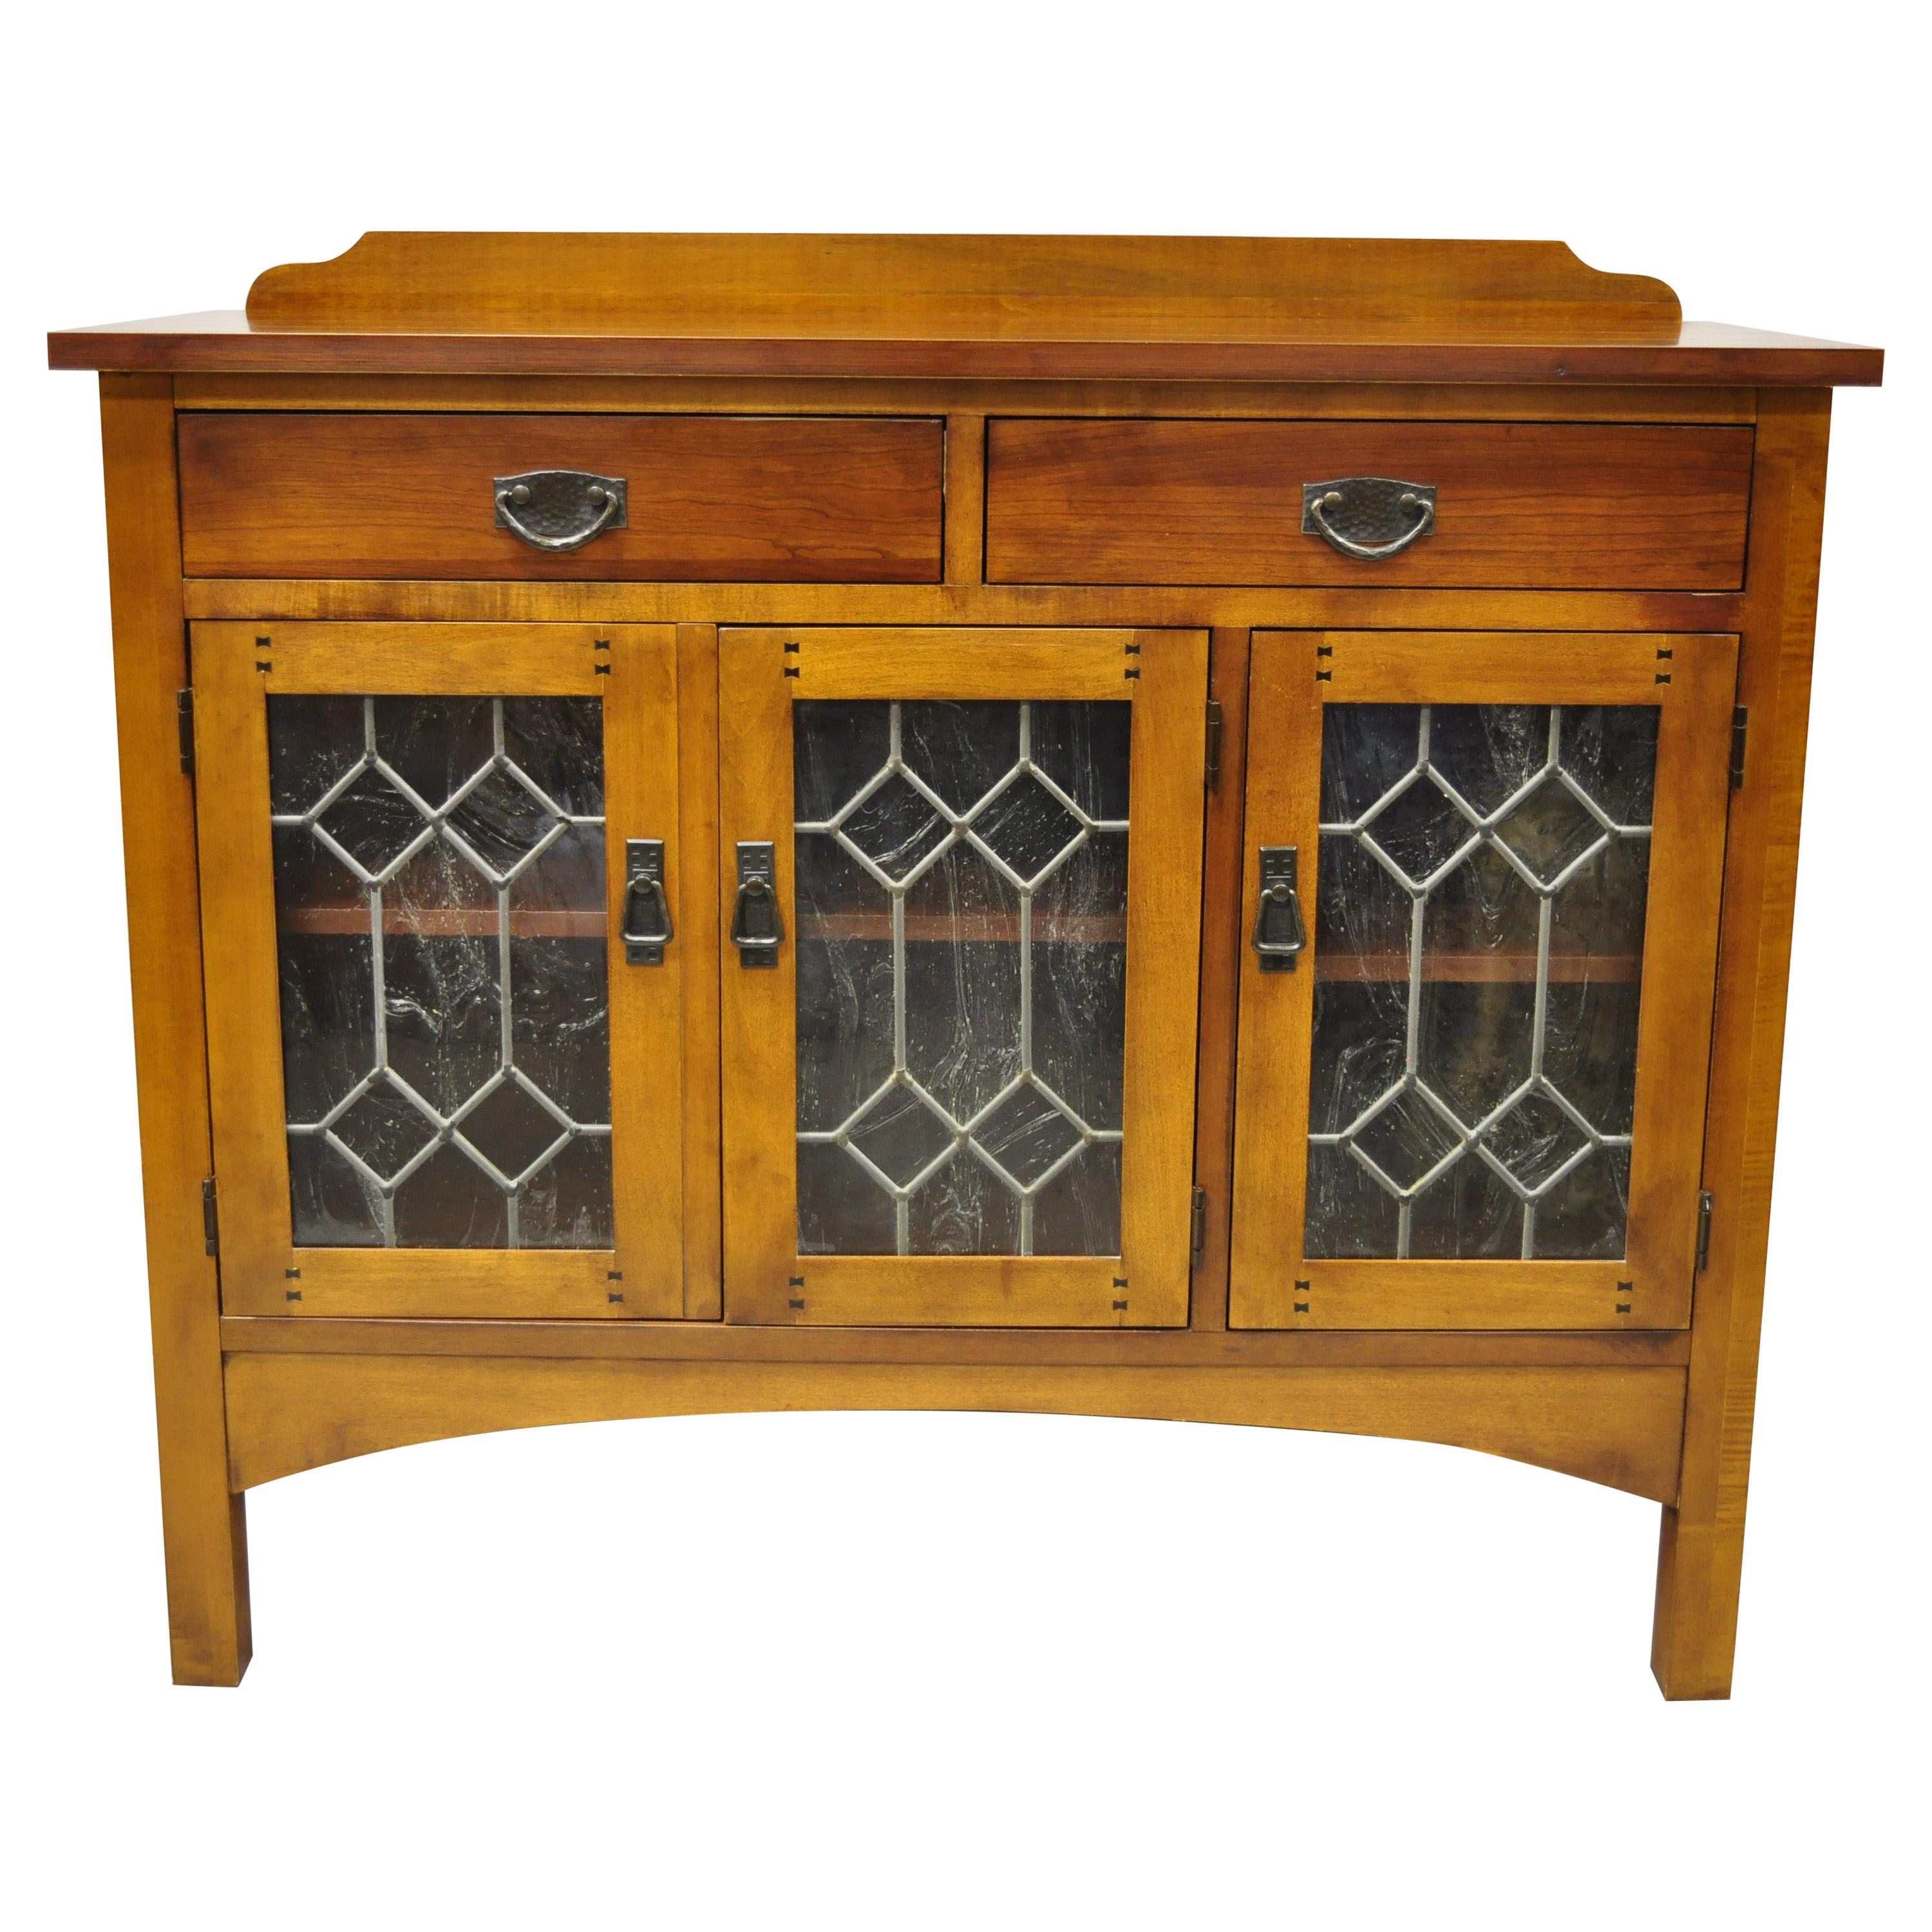 Drexel Heritage American Review Arts & Crafts Mission Cherry Buffet Sideboard